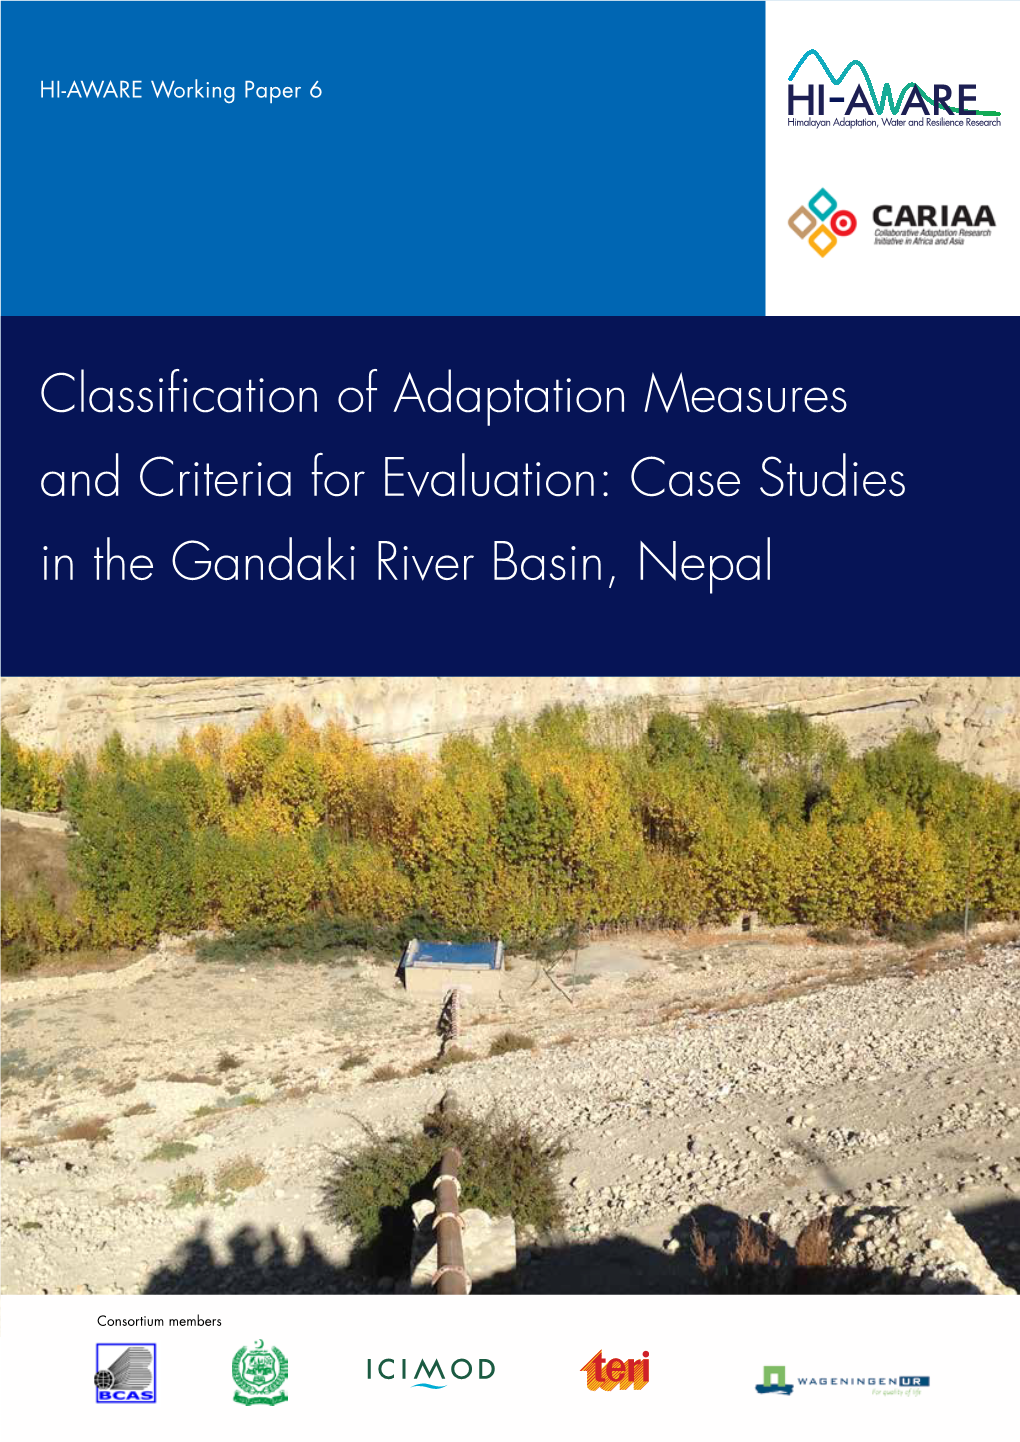 Classification of Adaptation Measures and Criteria for Evaluation: Case Studies in the Gandaki River Basin, Nepal